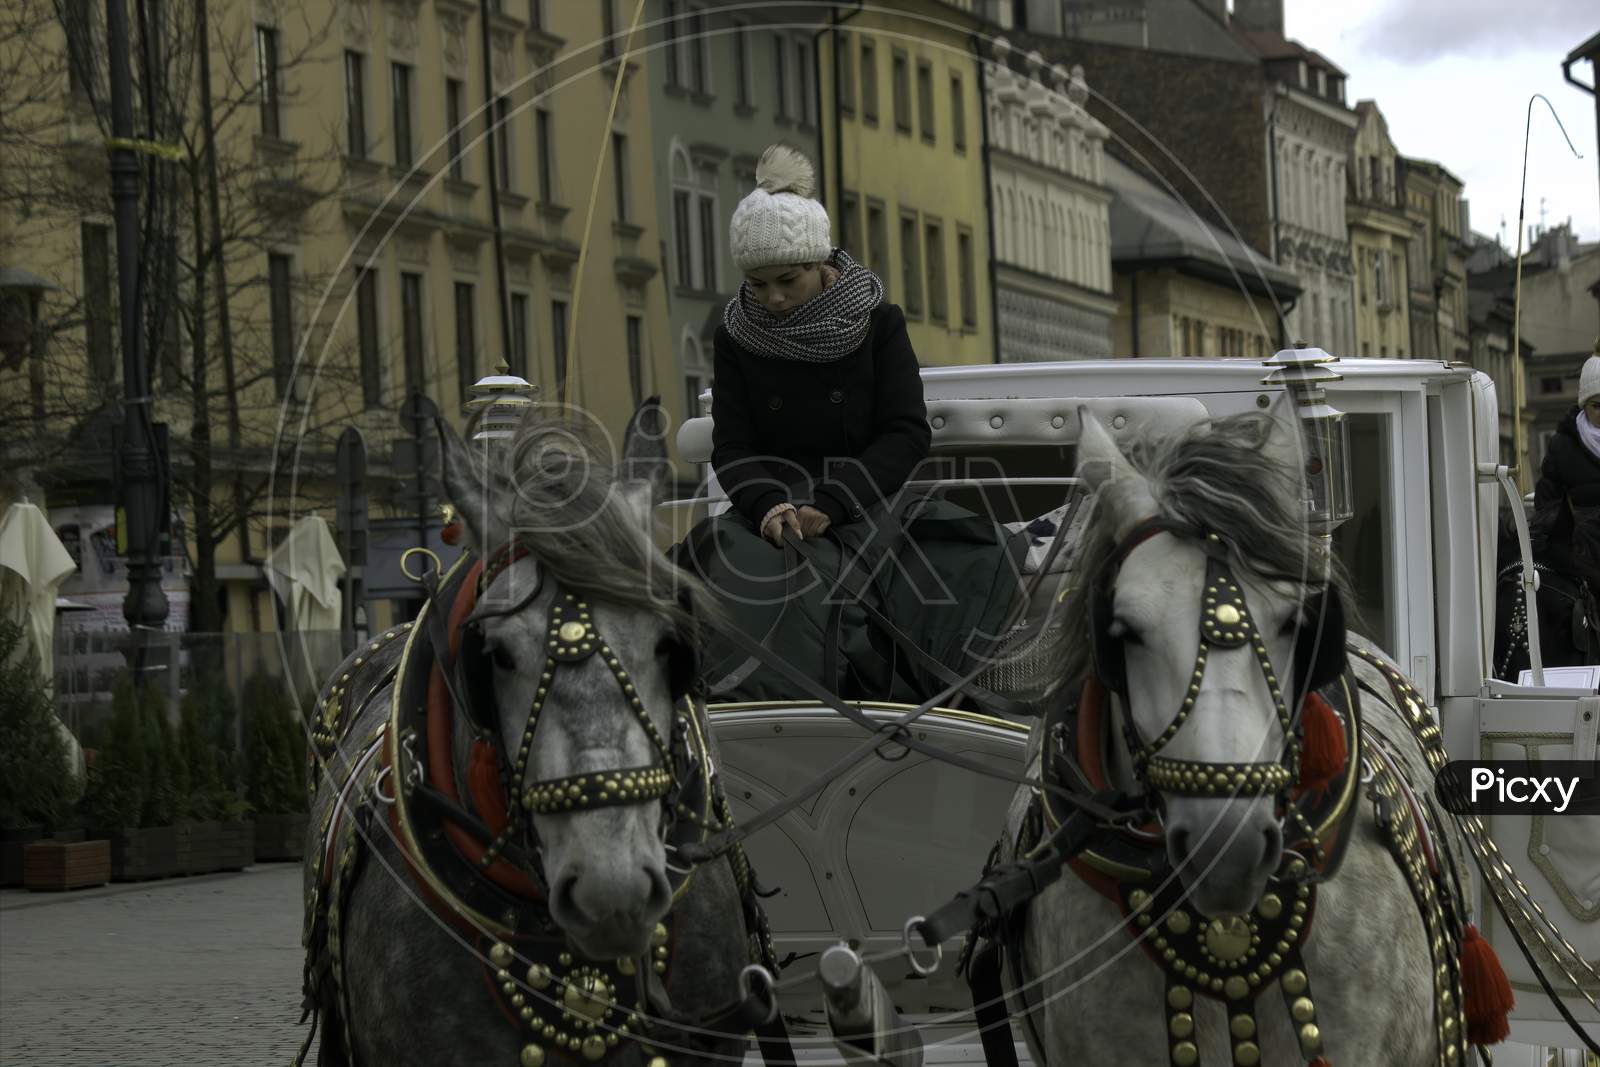 Krakow, Poland - December 23, 2014: A Lady Drive A Horse Cart Carriage On A Winter During Christmas Eve In Main Square City Center In Order To Attract Tourist